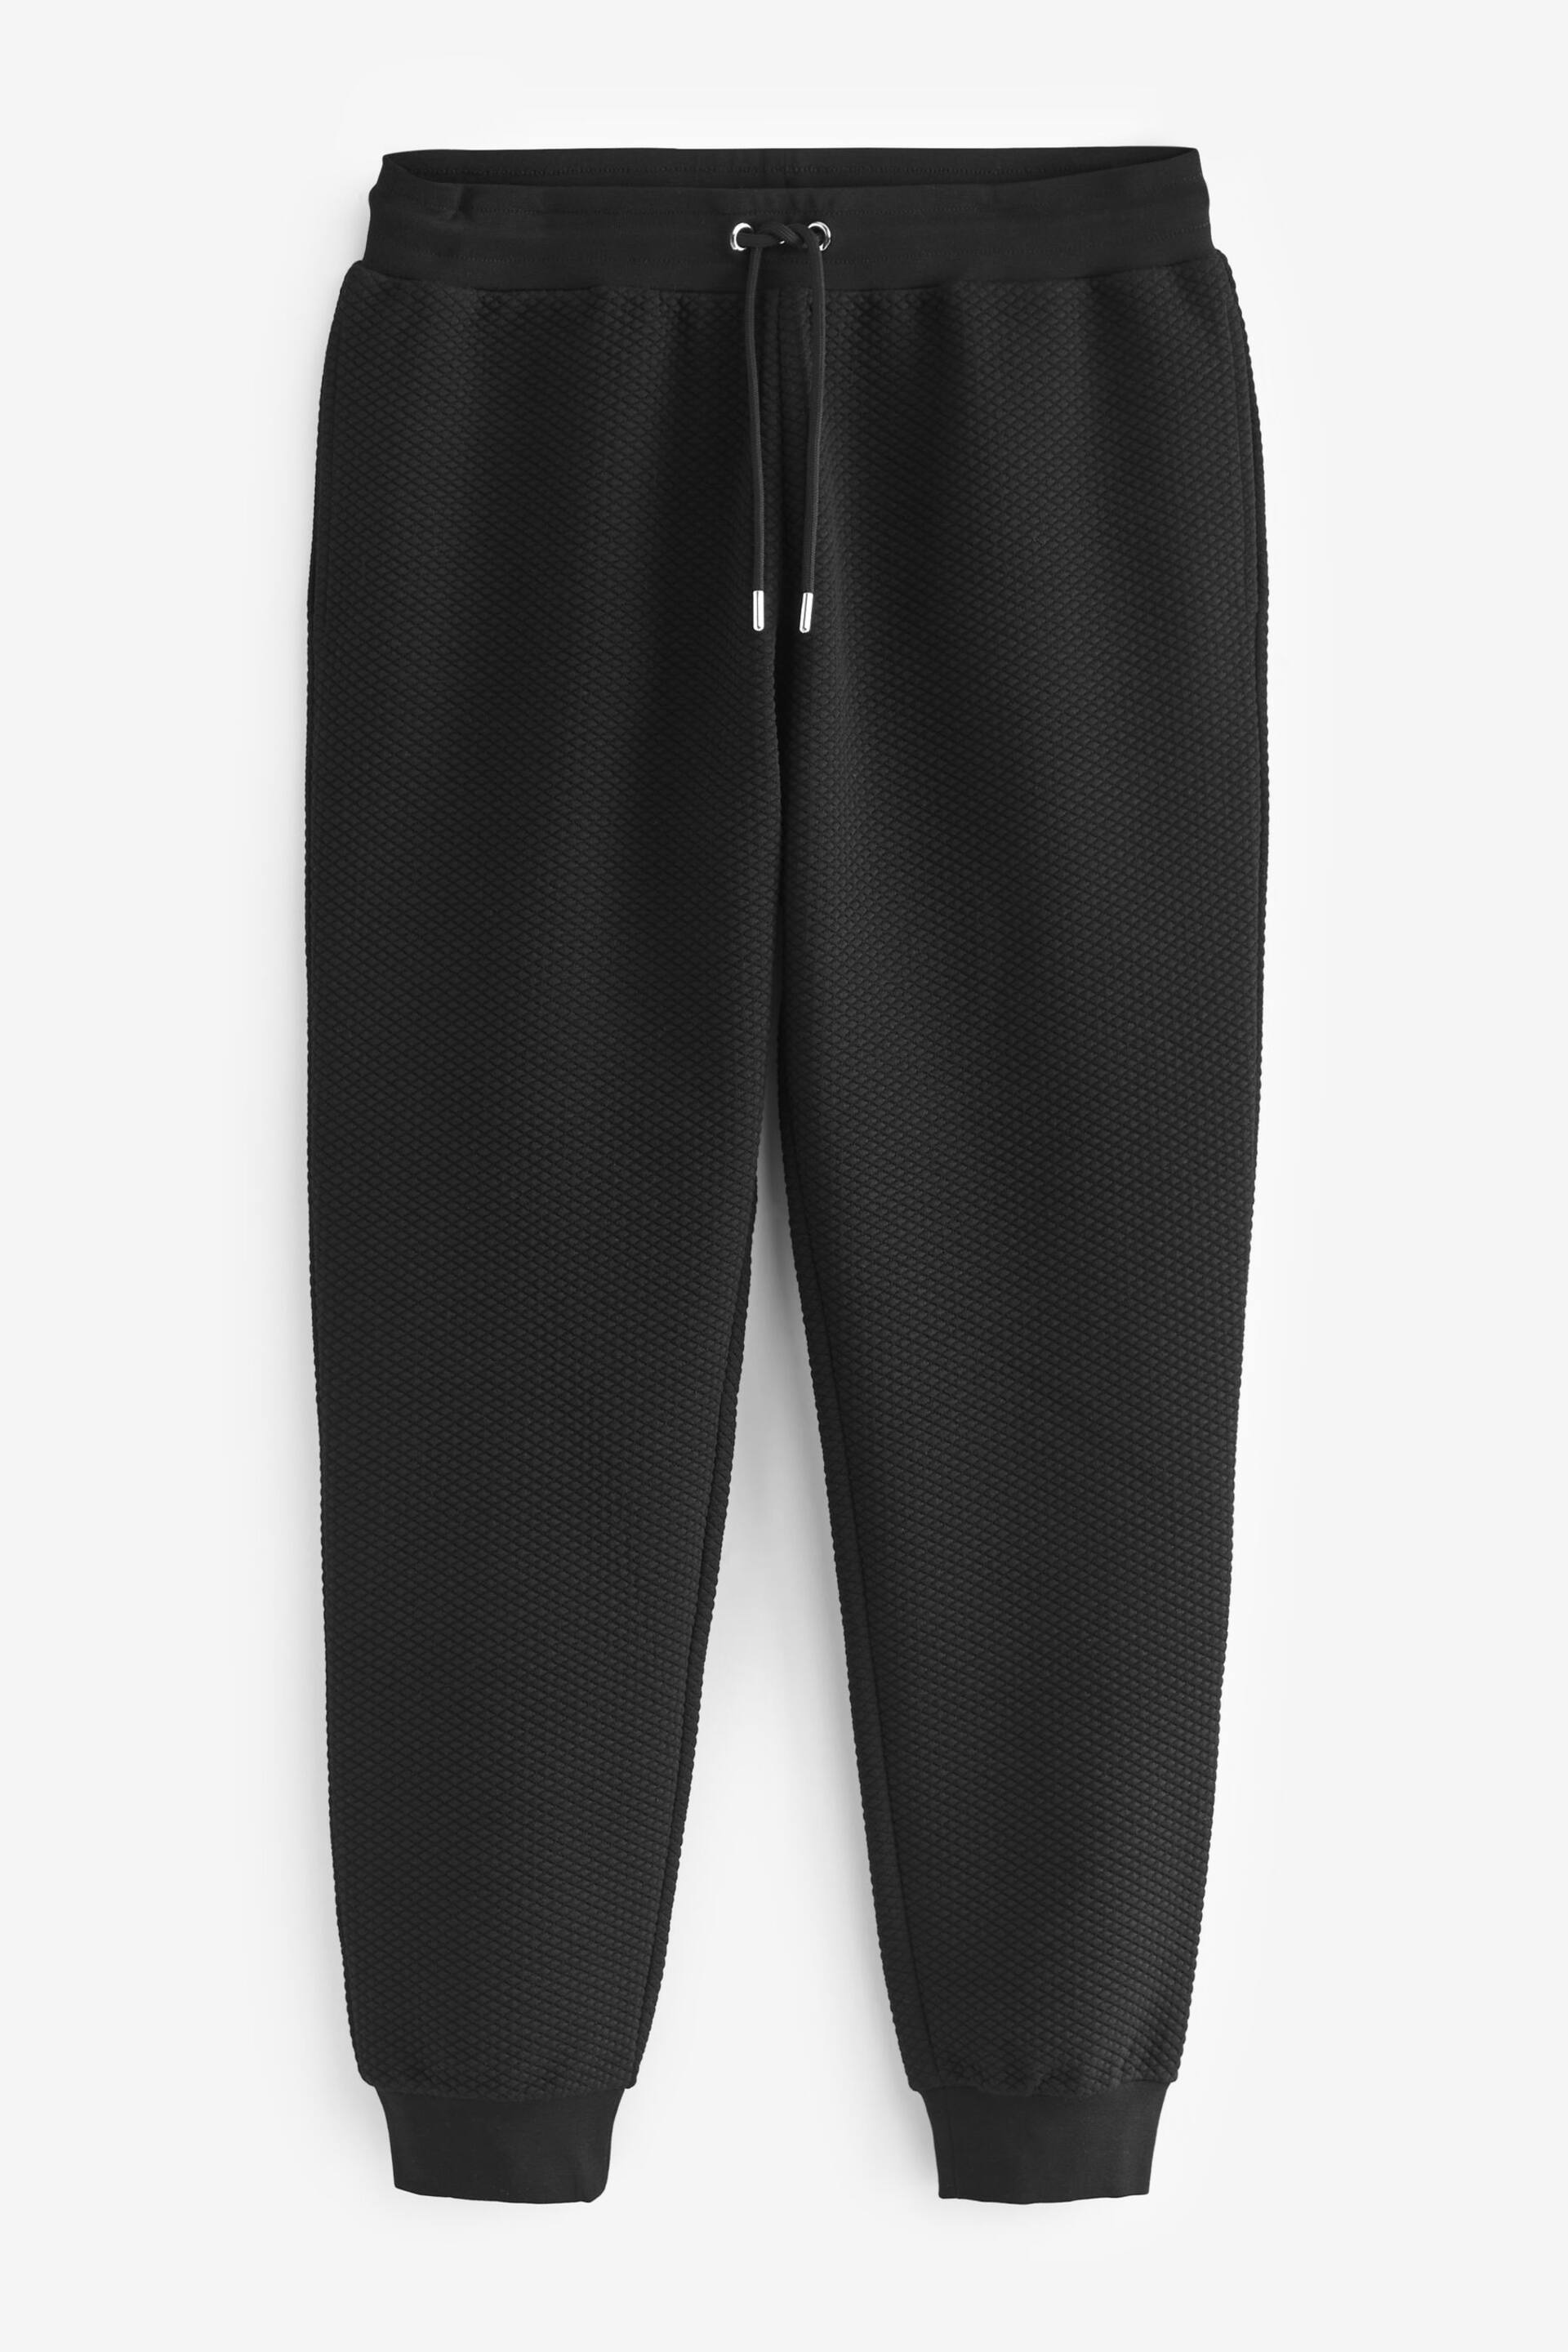 Black Textured Joggers - Image 5 of 7